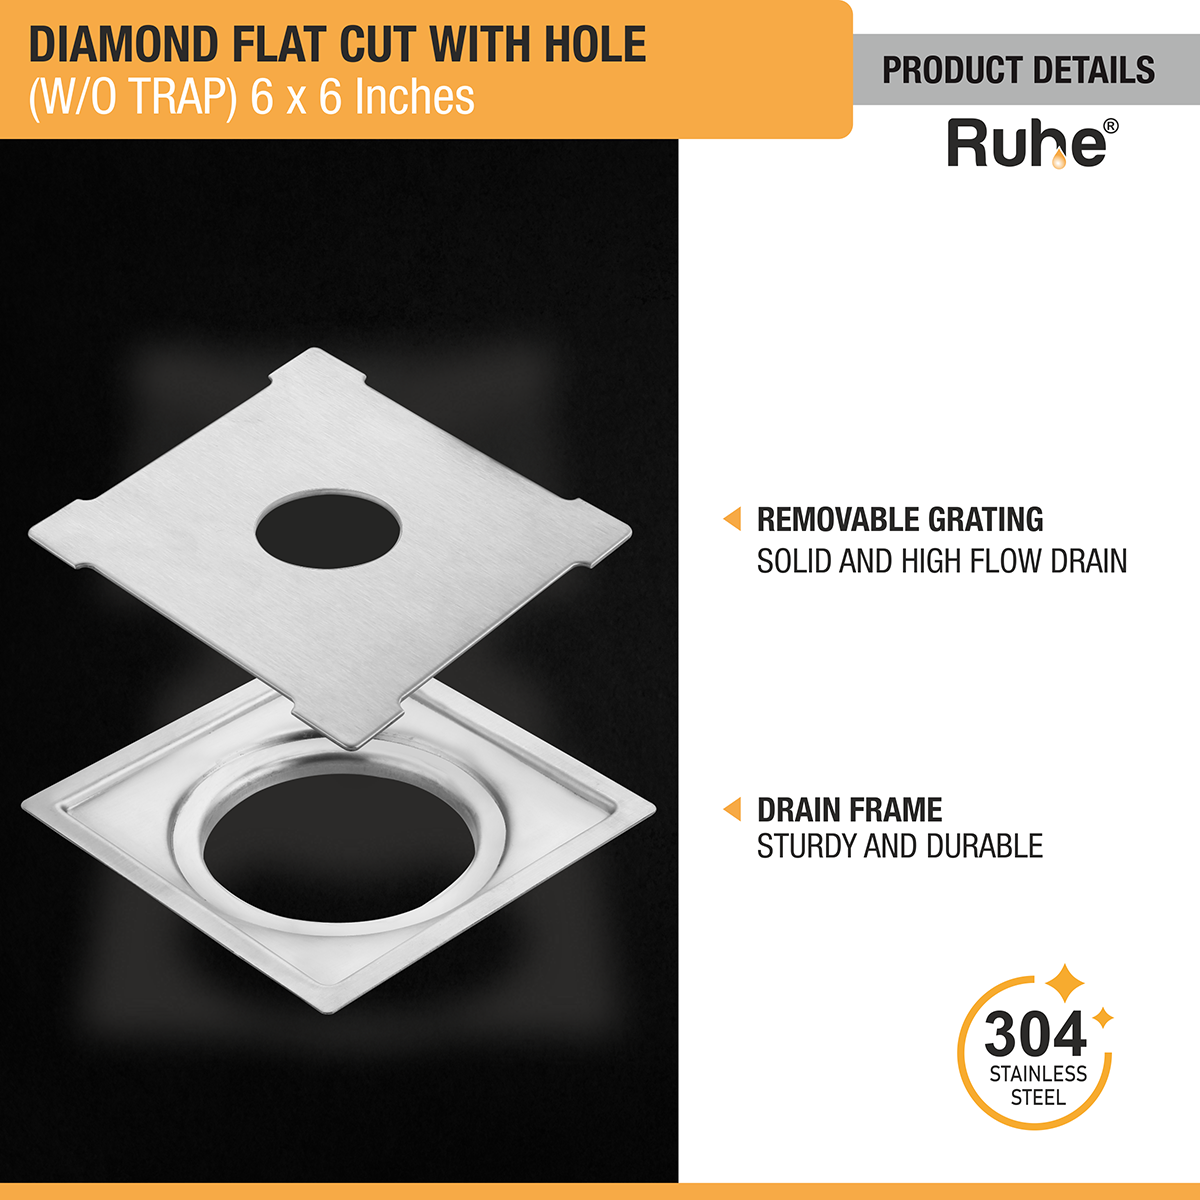 Diamond Square Flat Cut 304-Grade Floor Drain with Hole (6 x 6 Inches) with removable grating and drain frame